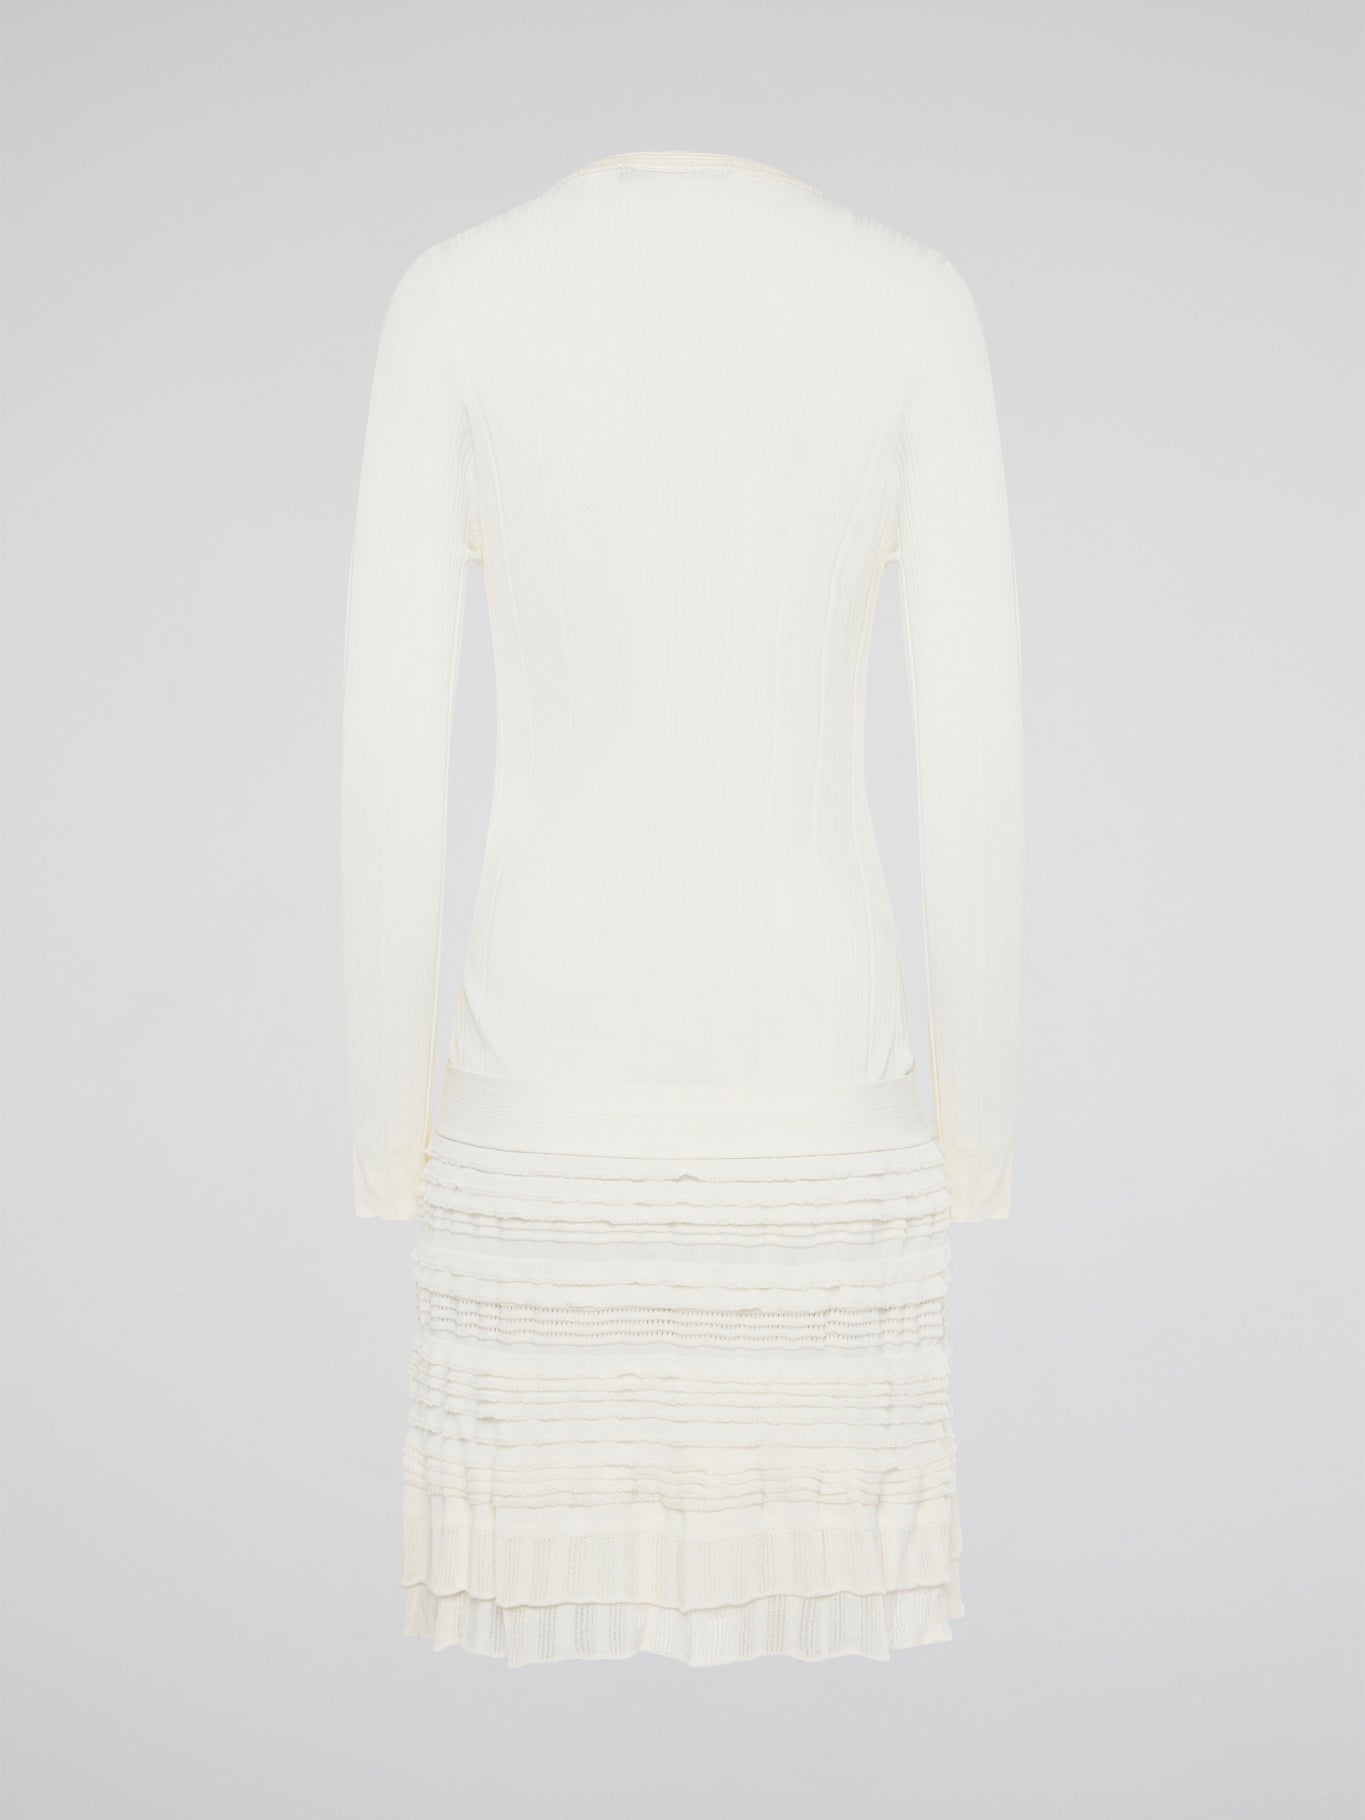 Elevate your winter wardrobe with the luxurious White Knitted Sweater Dress by Roberto Cavalli. This chic and sophisticated piece features intricate knit detailing and a flattering silhouette that will turn heads wherever you go. Whether you're dressing it up with heels for a night out or styling it casually with boots, this sweater dress is sure to make a statement.